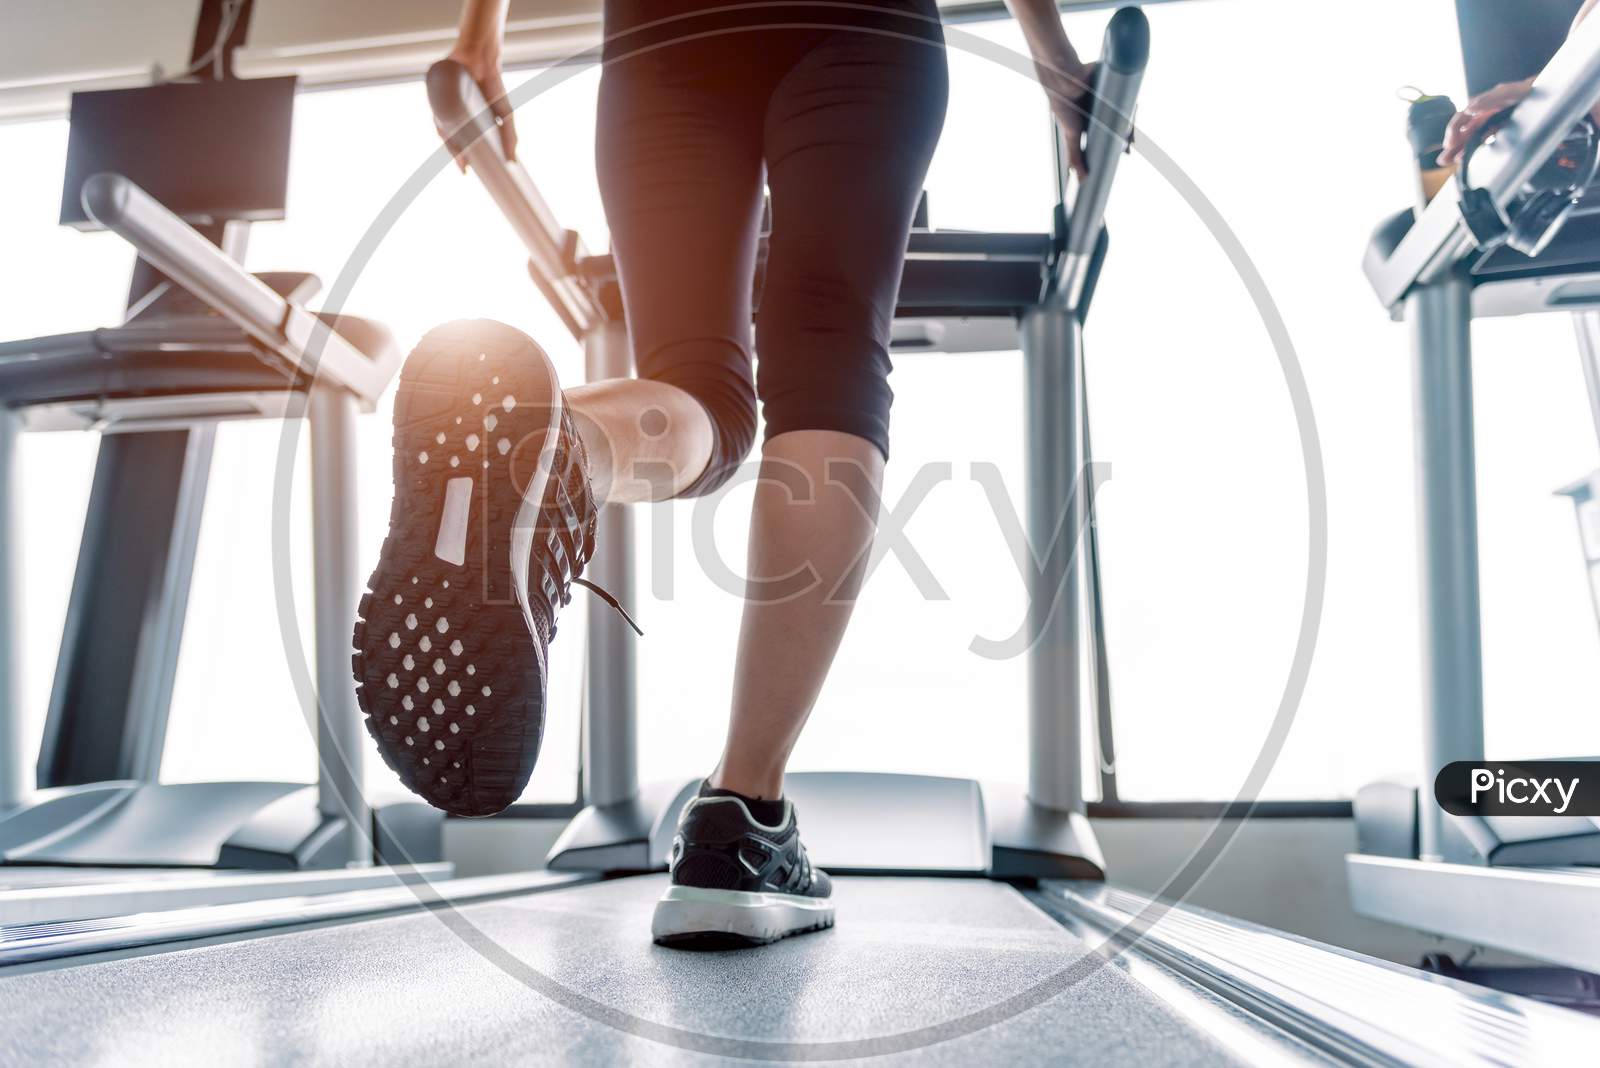 Lower Body At Legs Part Of Fitness Girl Running On Running Machine Or Treadmill In Fitness Gym With Sun Ray. Warm Tone. Healthy And Exercise Activity Concept. Workout And  Strength Training Theme.